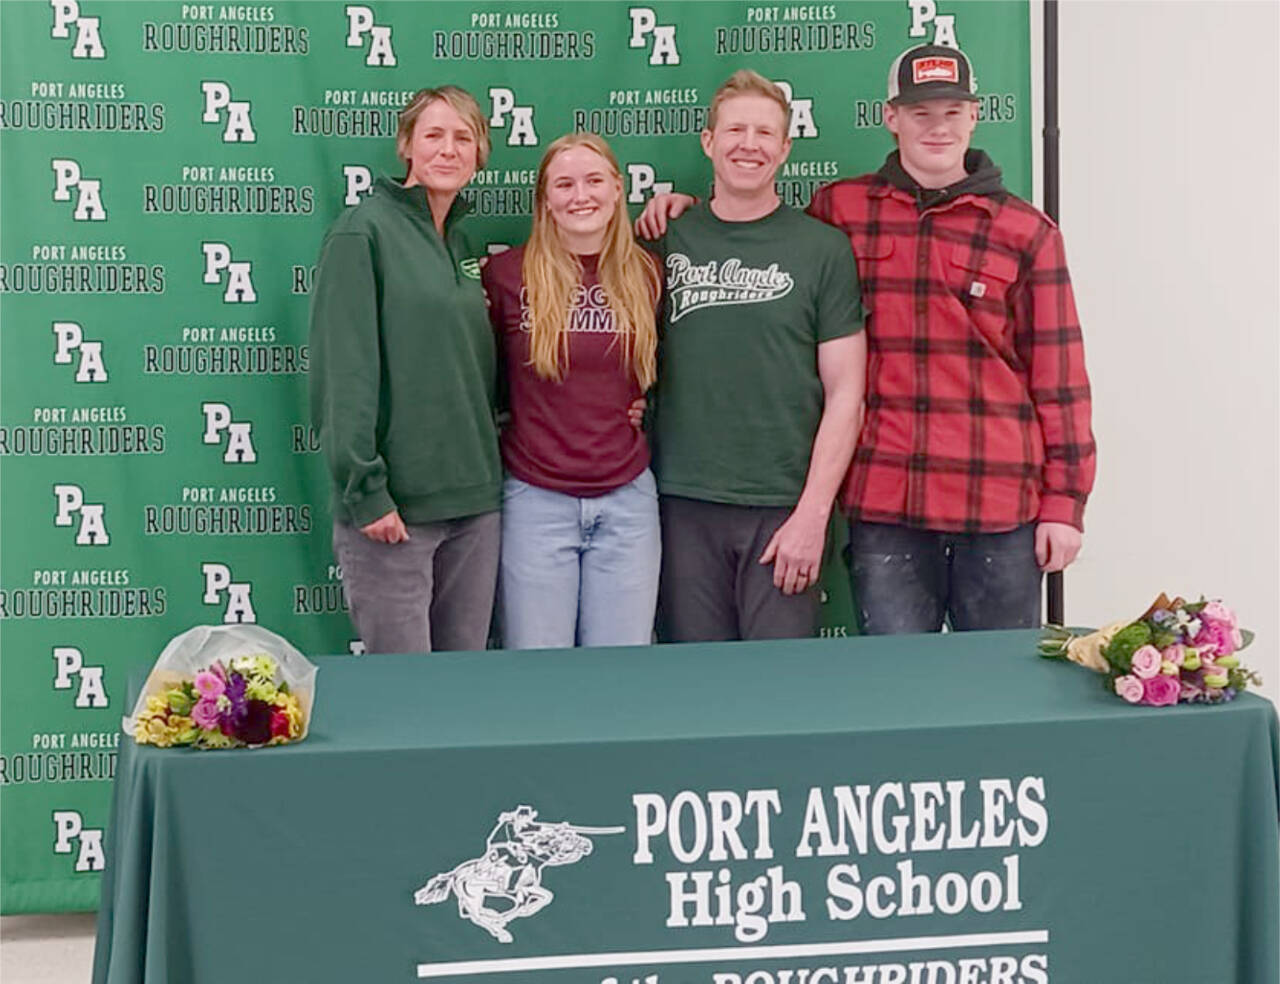 Port Angeles' Harper McGuire, a district champion in the 200 freestyle and 500 freestyle, signed Wednesday to swim for the University of Puget Sound. From left are mother Karry McGuire, Harper McGuire, father Michael McGuire and brother Ronan McGuire. (Pierre LaBossiere/Peninsula Daily News)